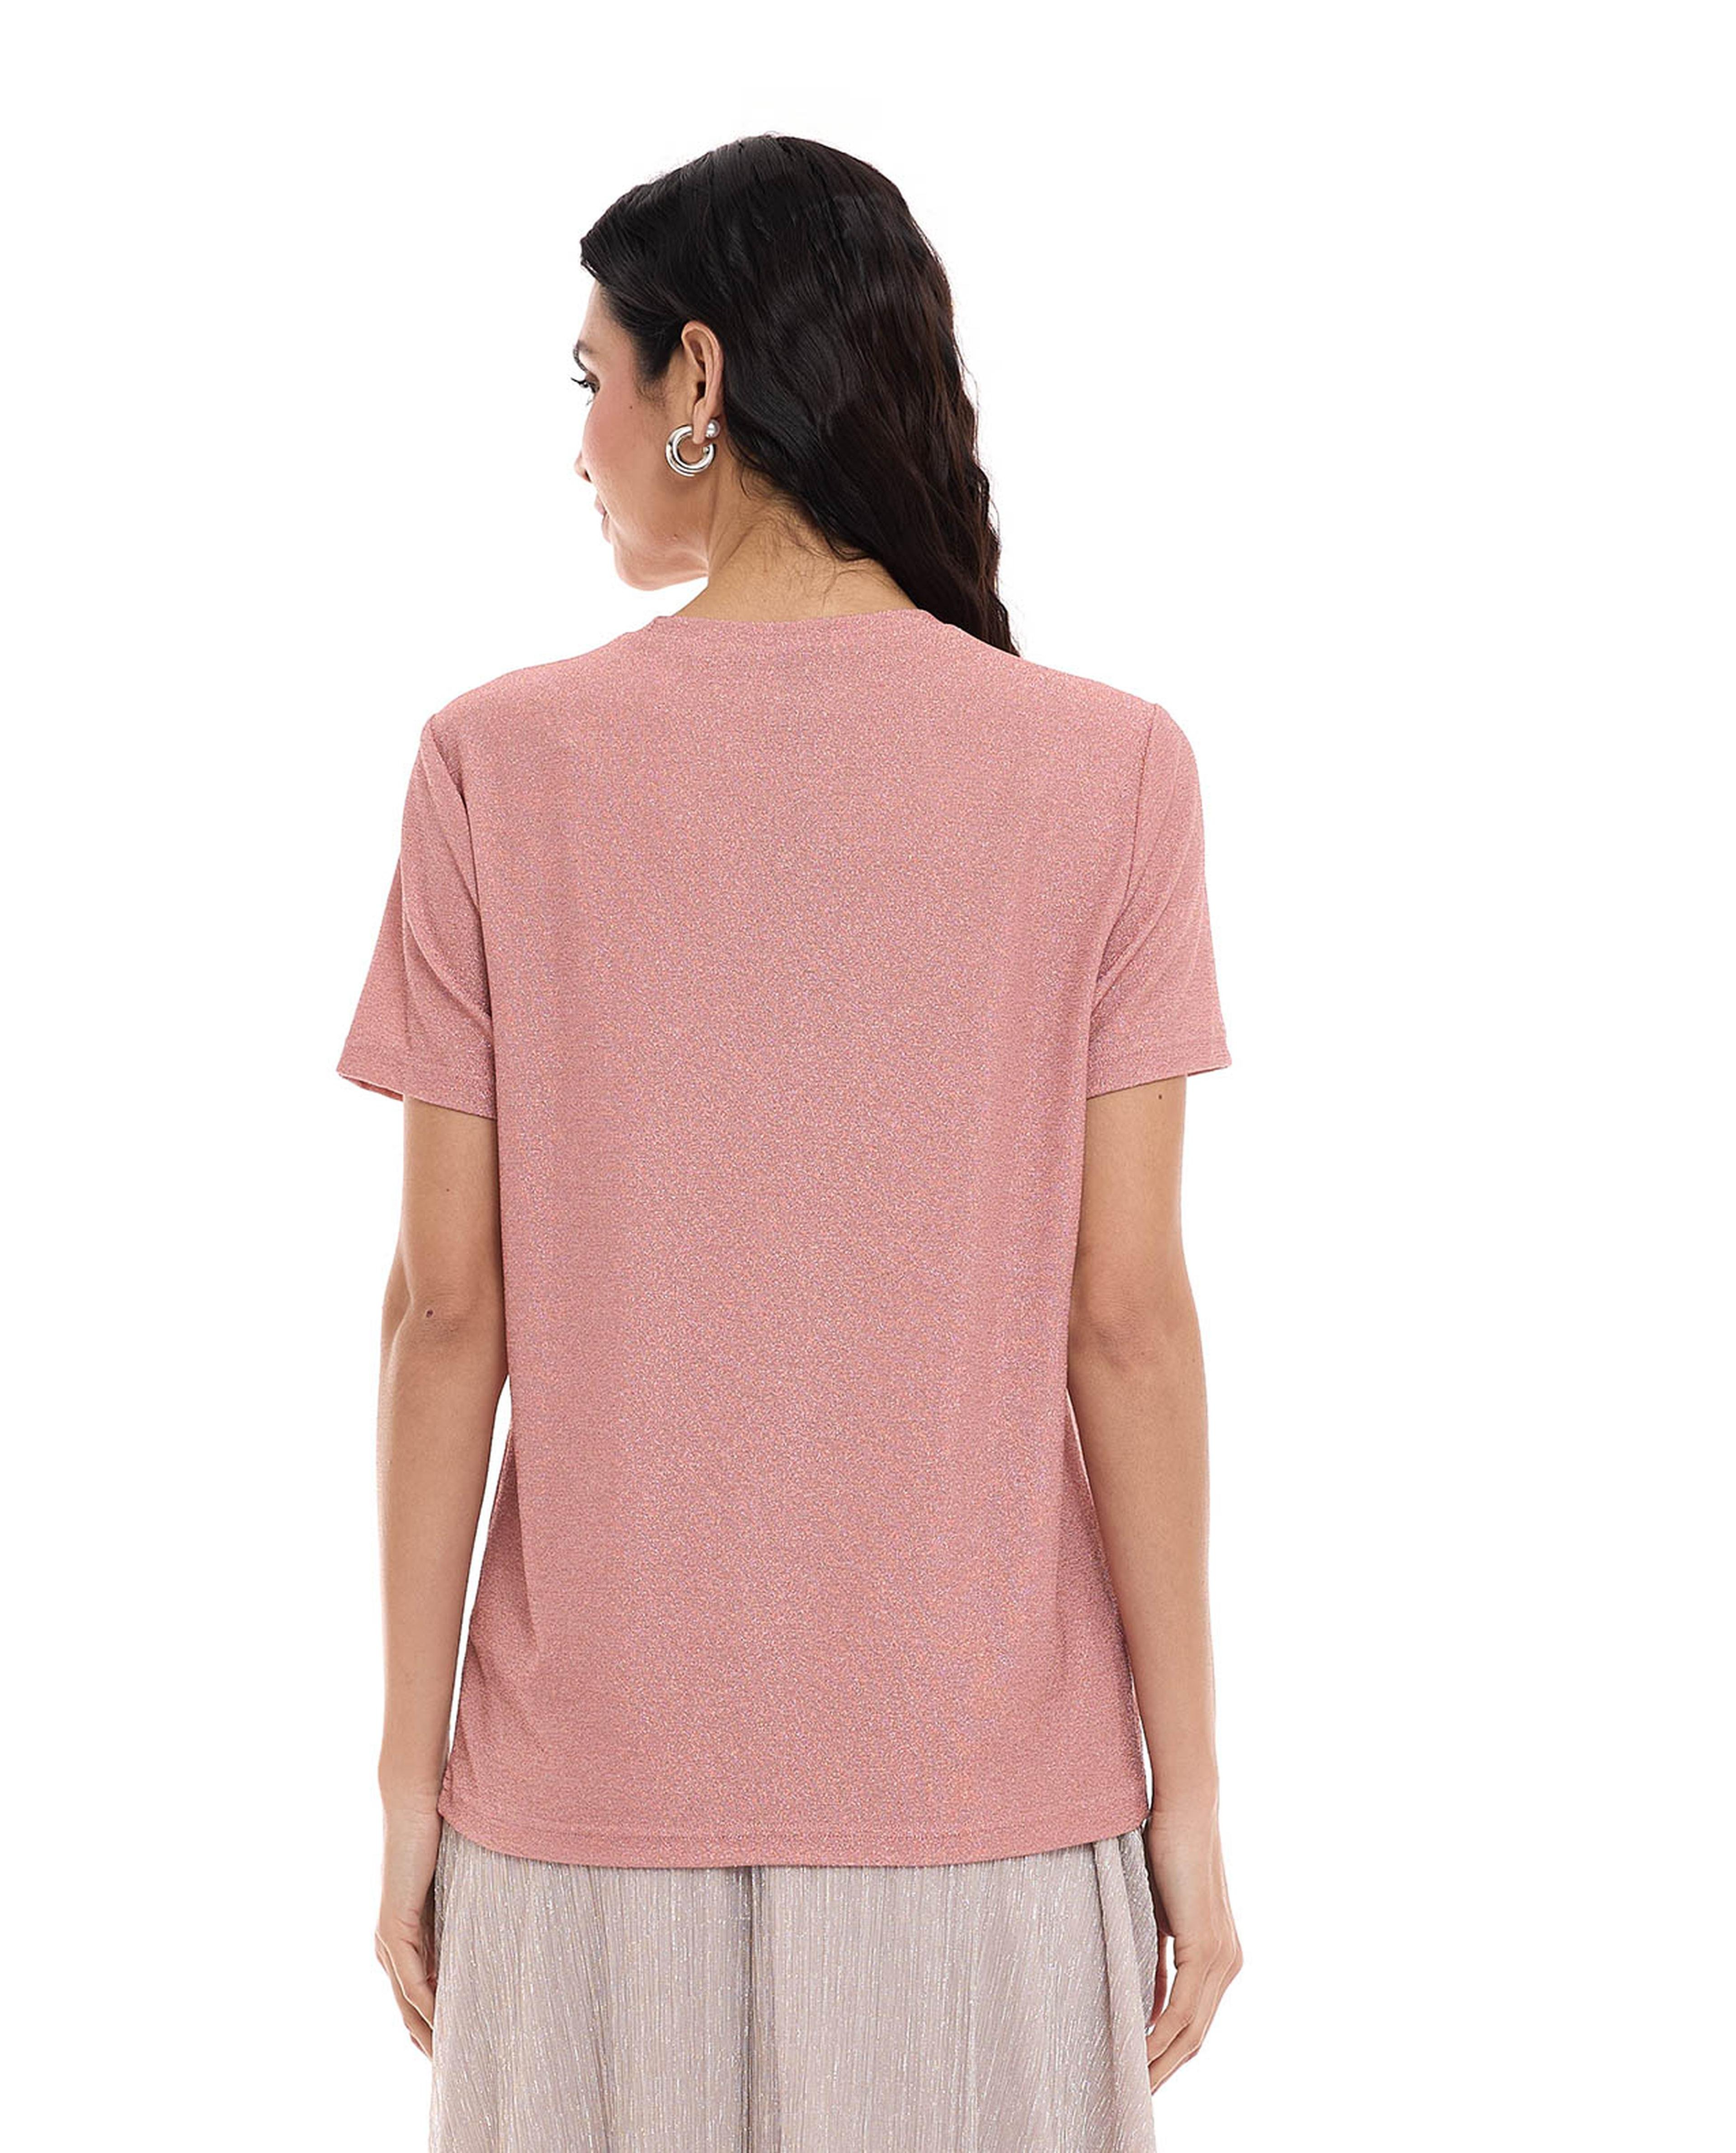 Shimmer Top with Crew Neck and Short Sleeves